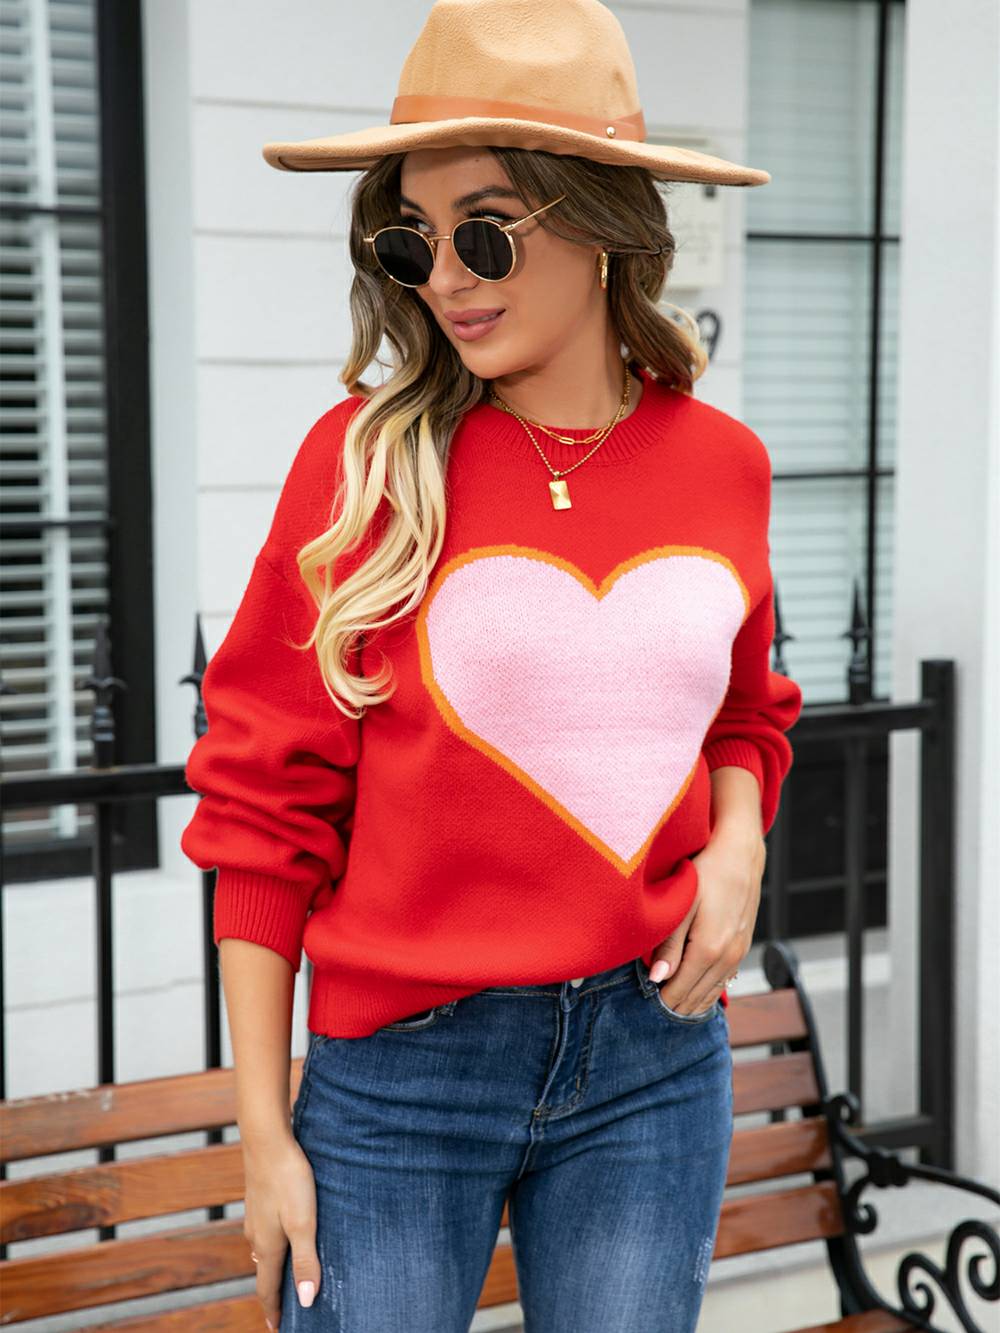 Sweetheart-Strickpullover